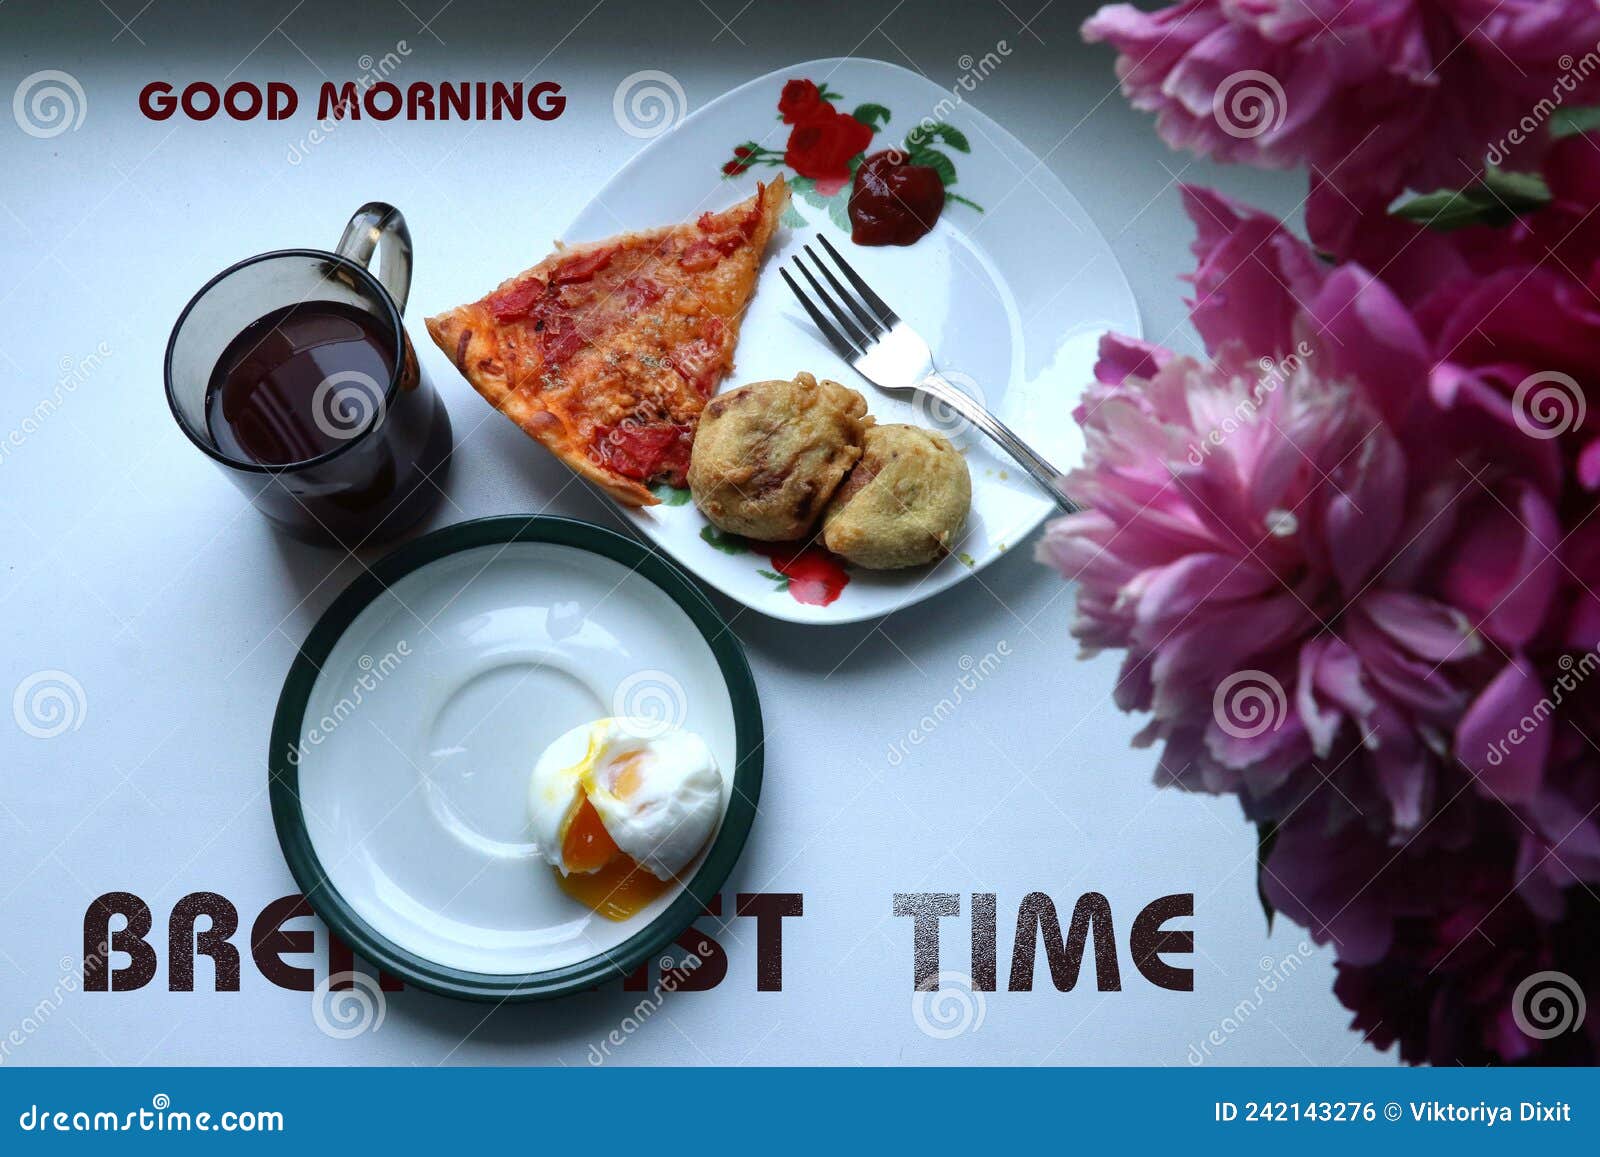 Romantic Breakfast Time in the Very Good Morning Stock Photo ...